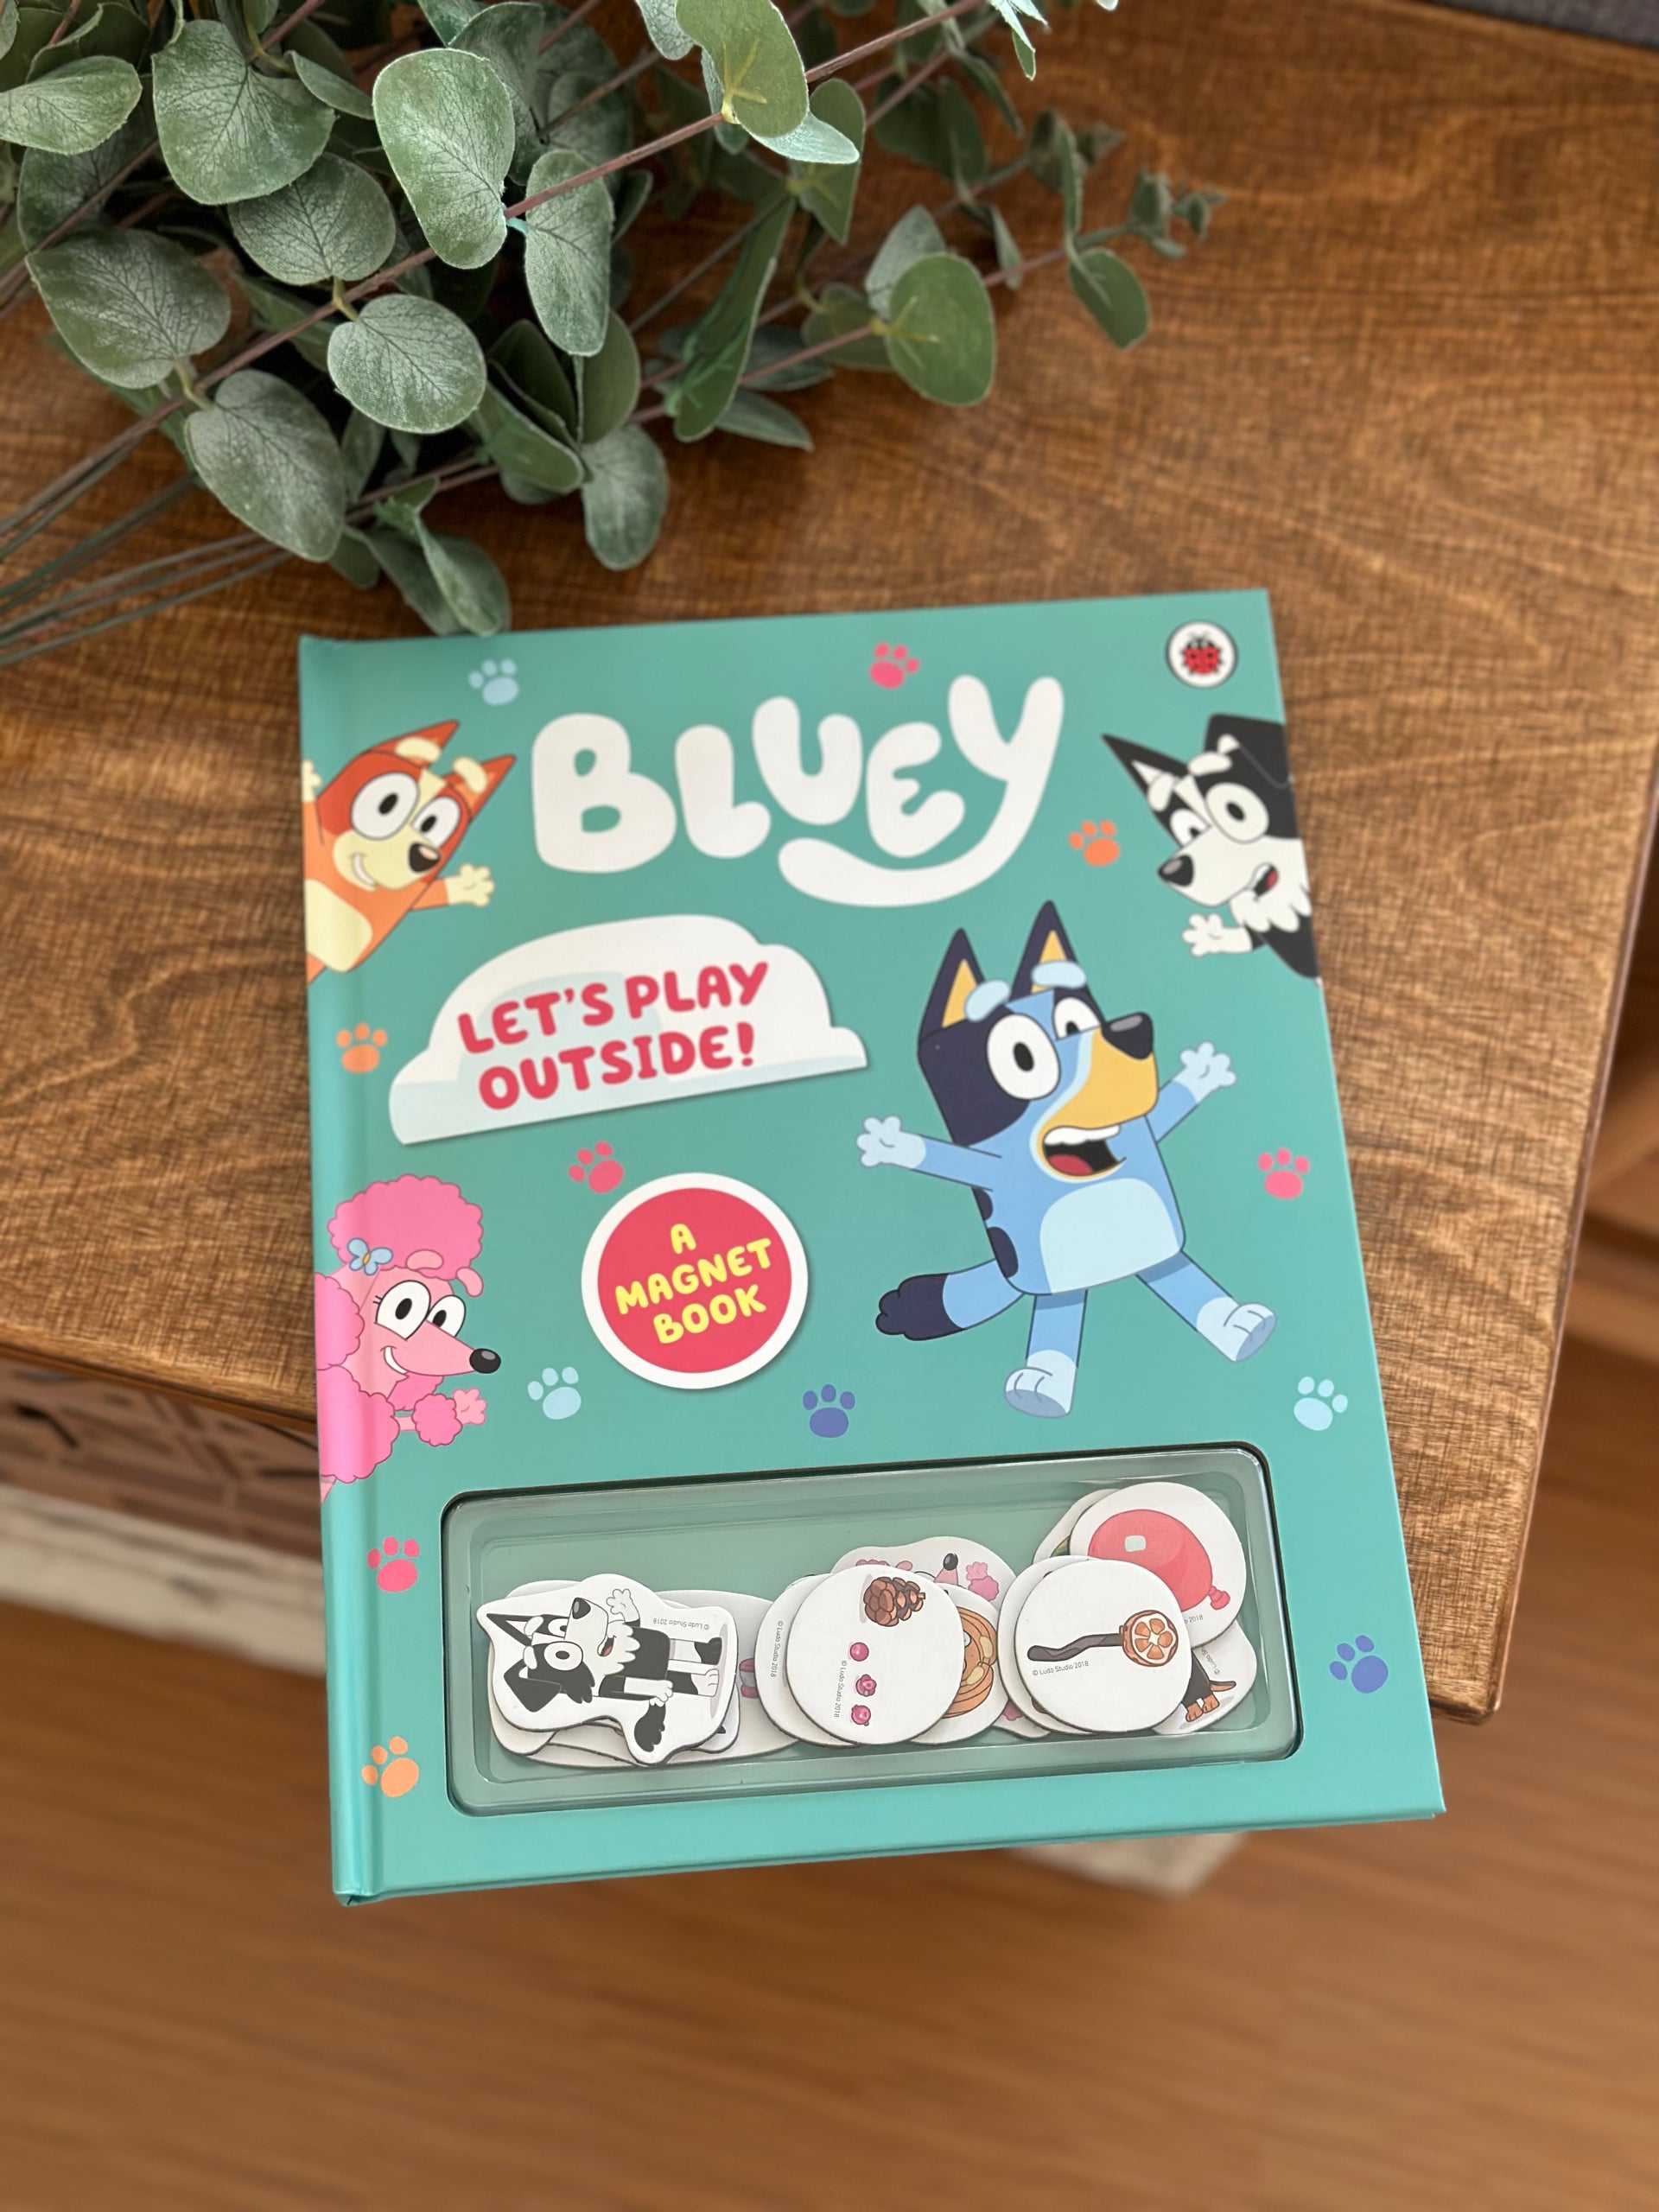 Bluey: Let's Play Outside! A Magnet Book – Clap Clap Hands